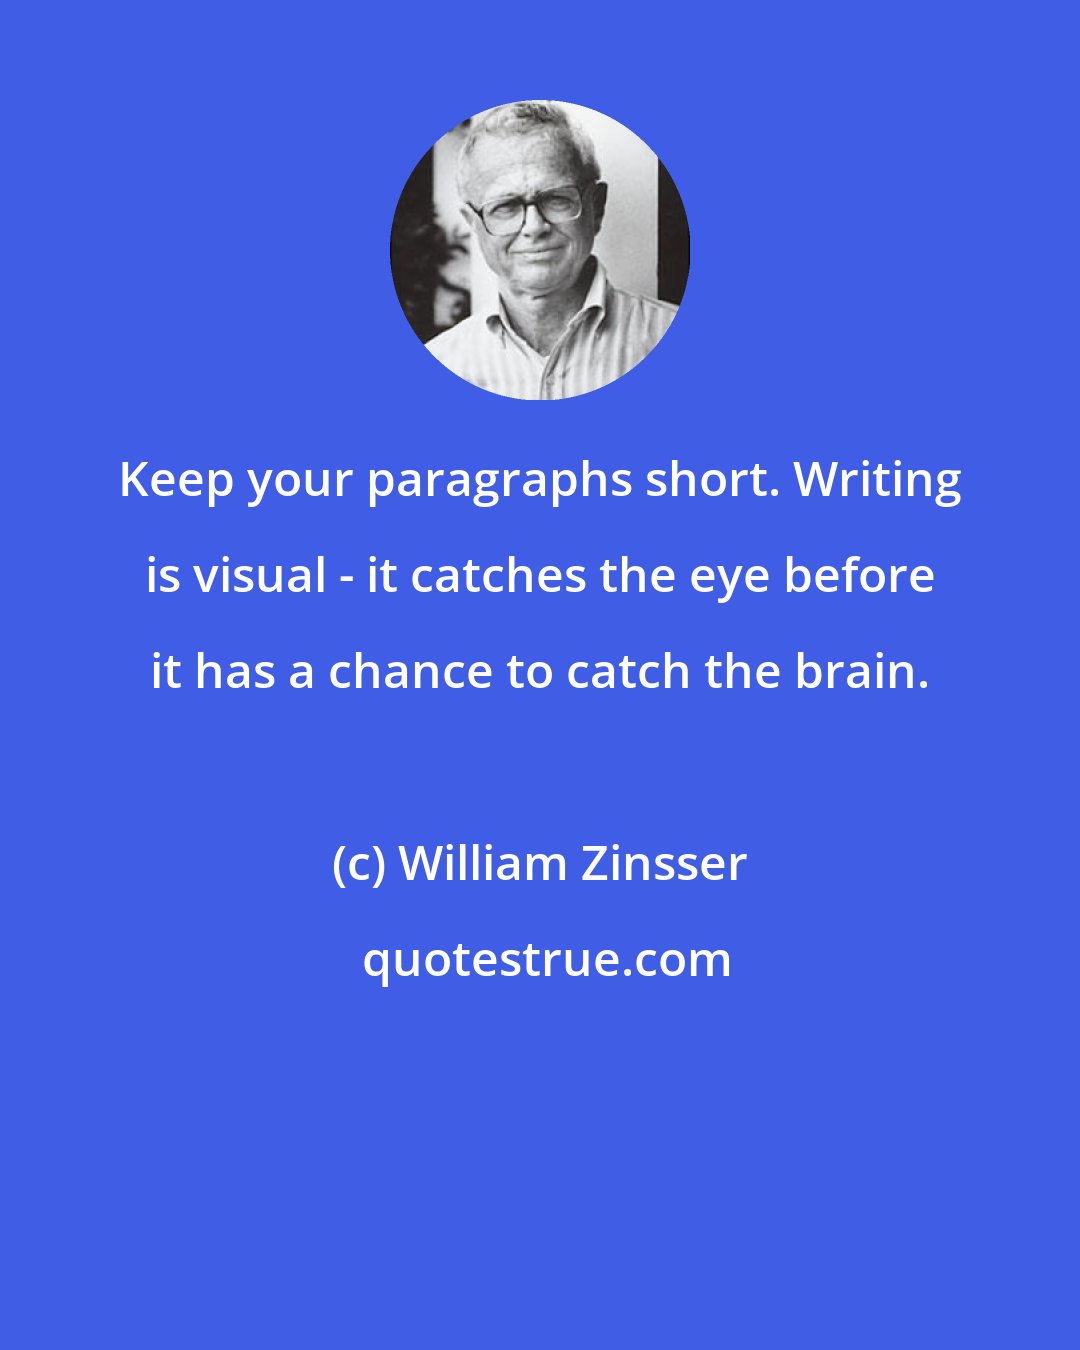 William Zinsser: Keep your paragraphs short. Writing is visual - it catches the eye before it has a chance to catch the brain.